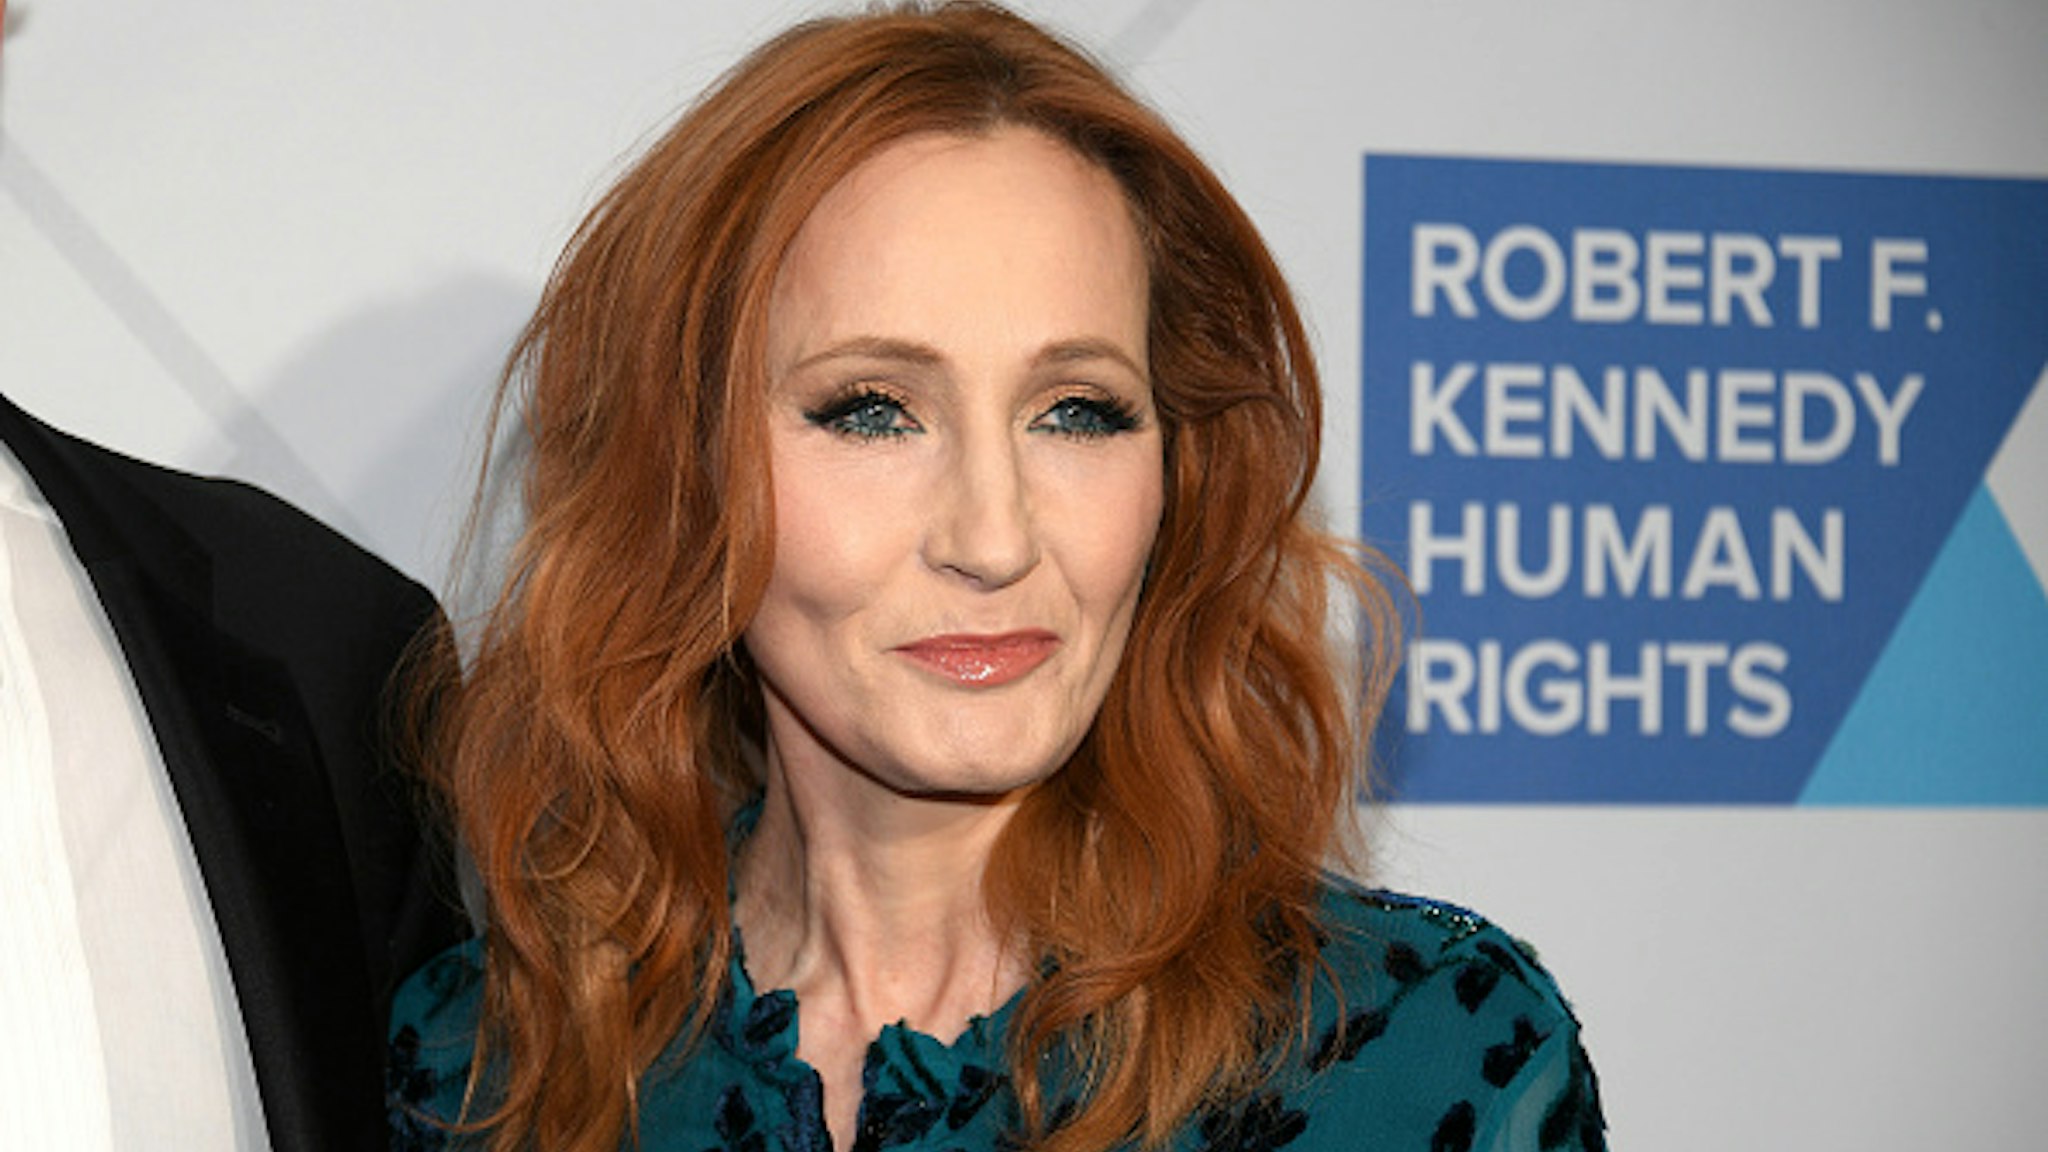 Author J.k. Rowling arrives at the RFK Ripple of Hope Awards at New York Hilton Midtown on December 12, 2019 in New York City